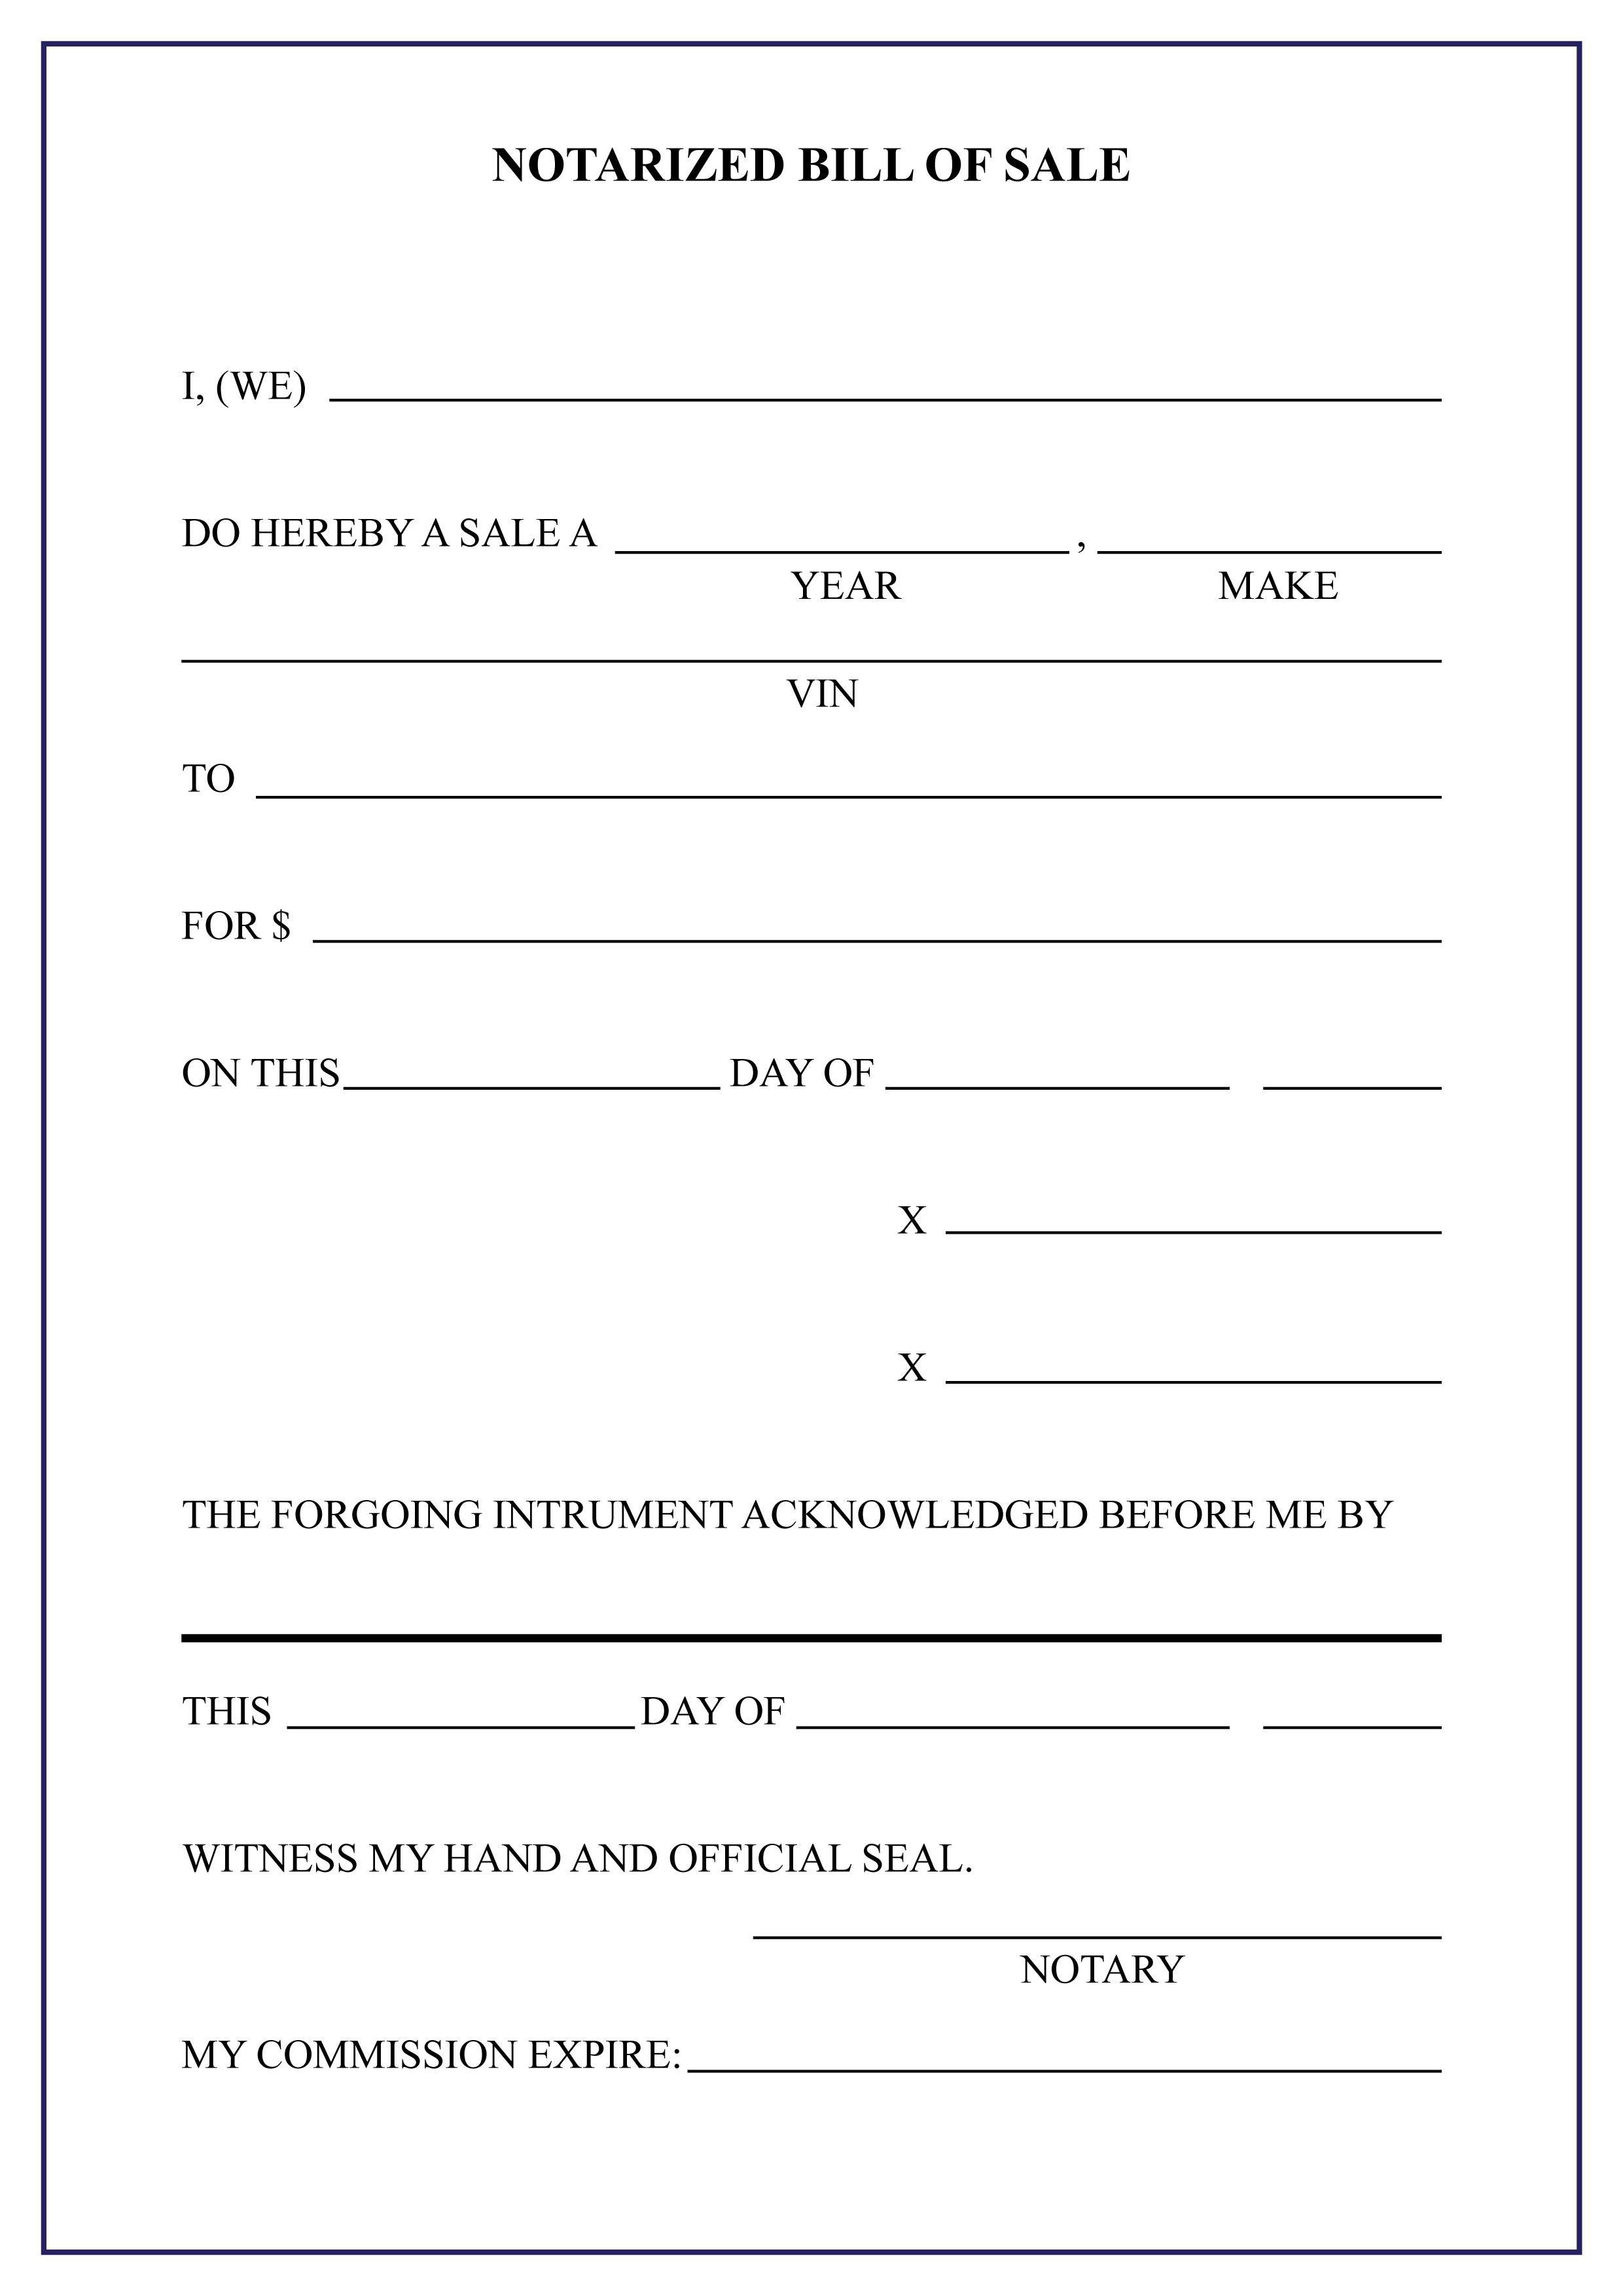 Notarized Bill of Sale01 Best Letter Template